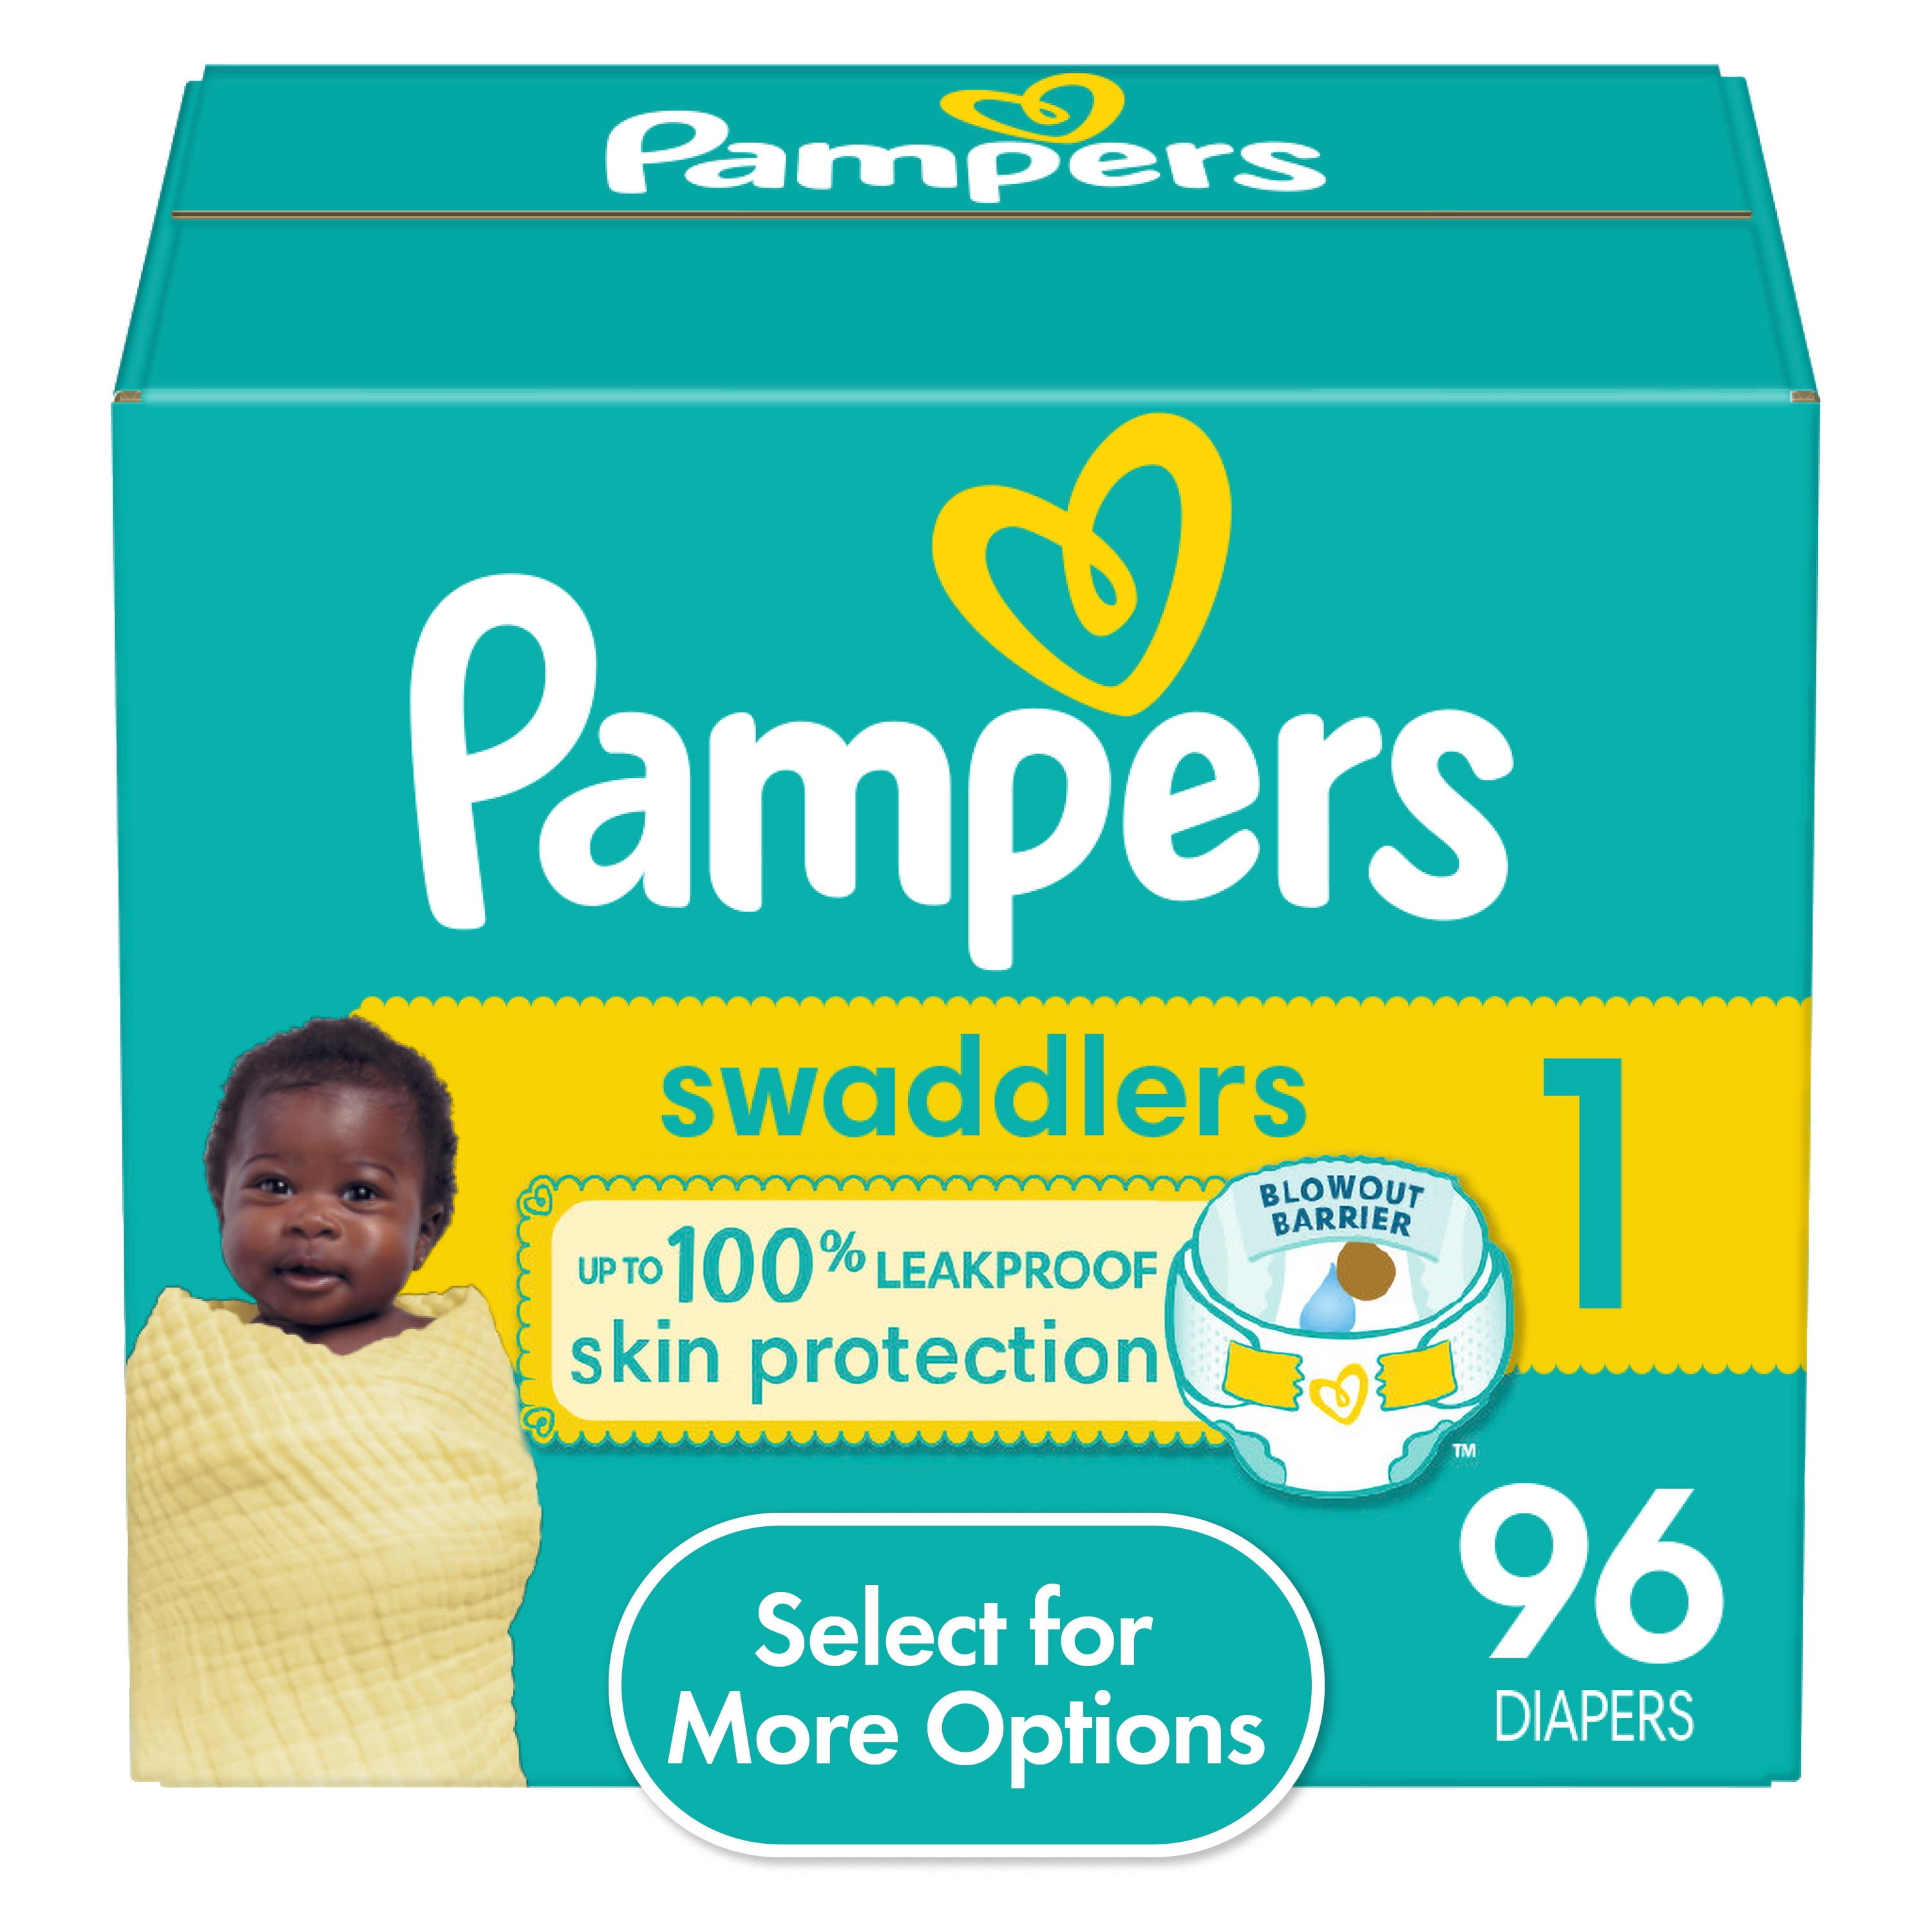 Pampers Swaddlers Diapers, 1 (8-14 lb), Super Pack - 96 diapers